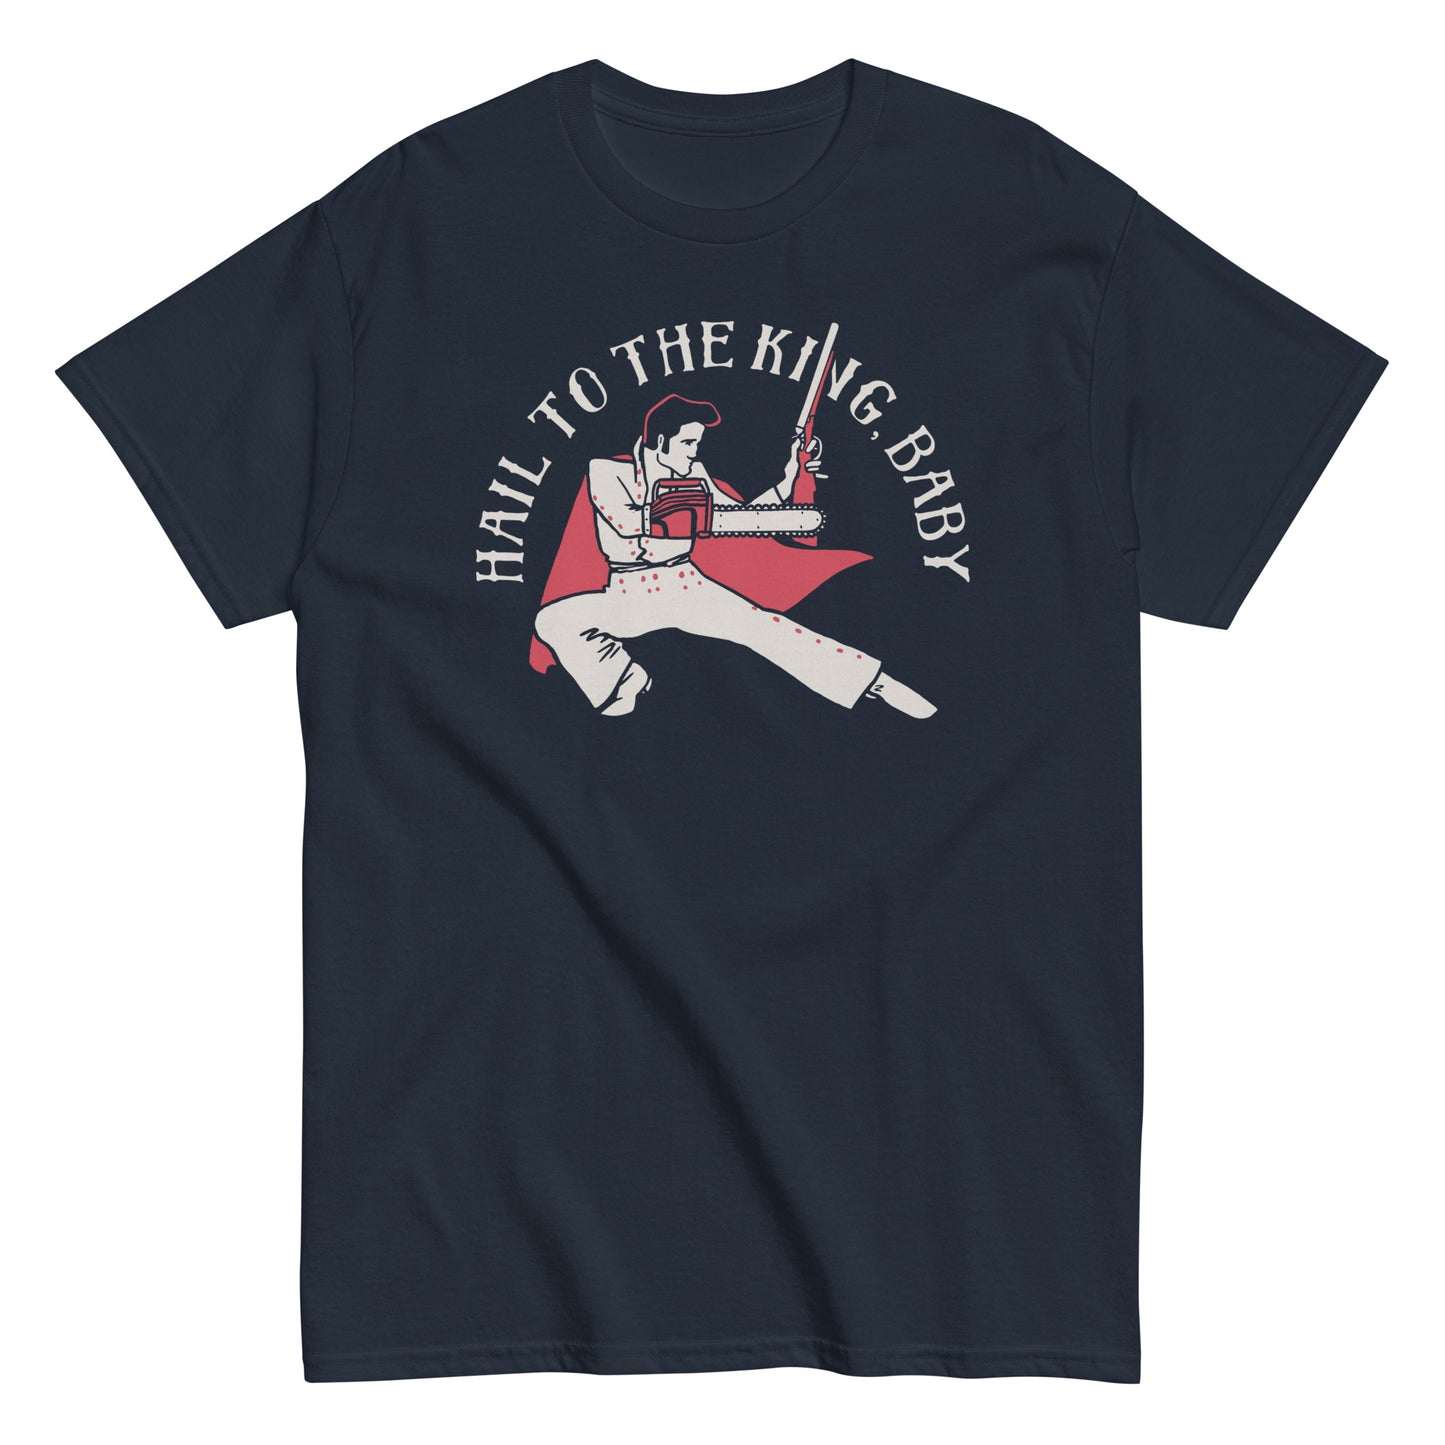 Hail To The King, Baby Men's Classic Tee